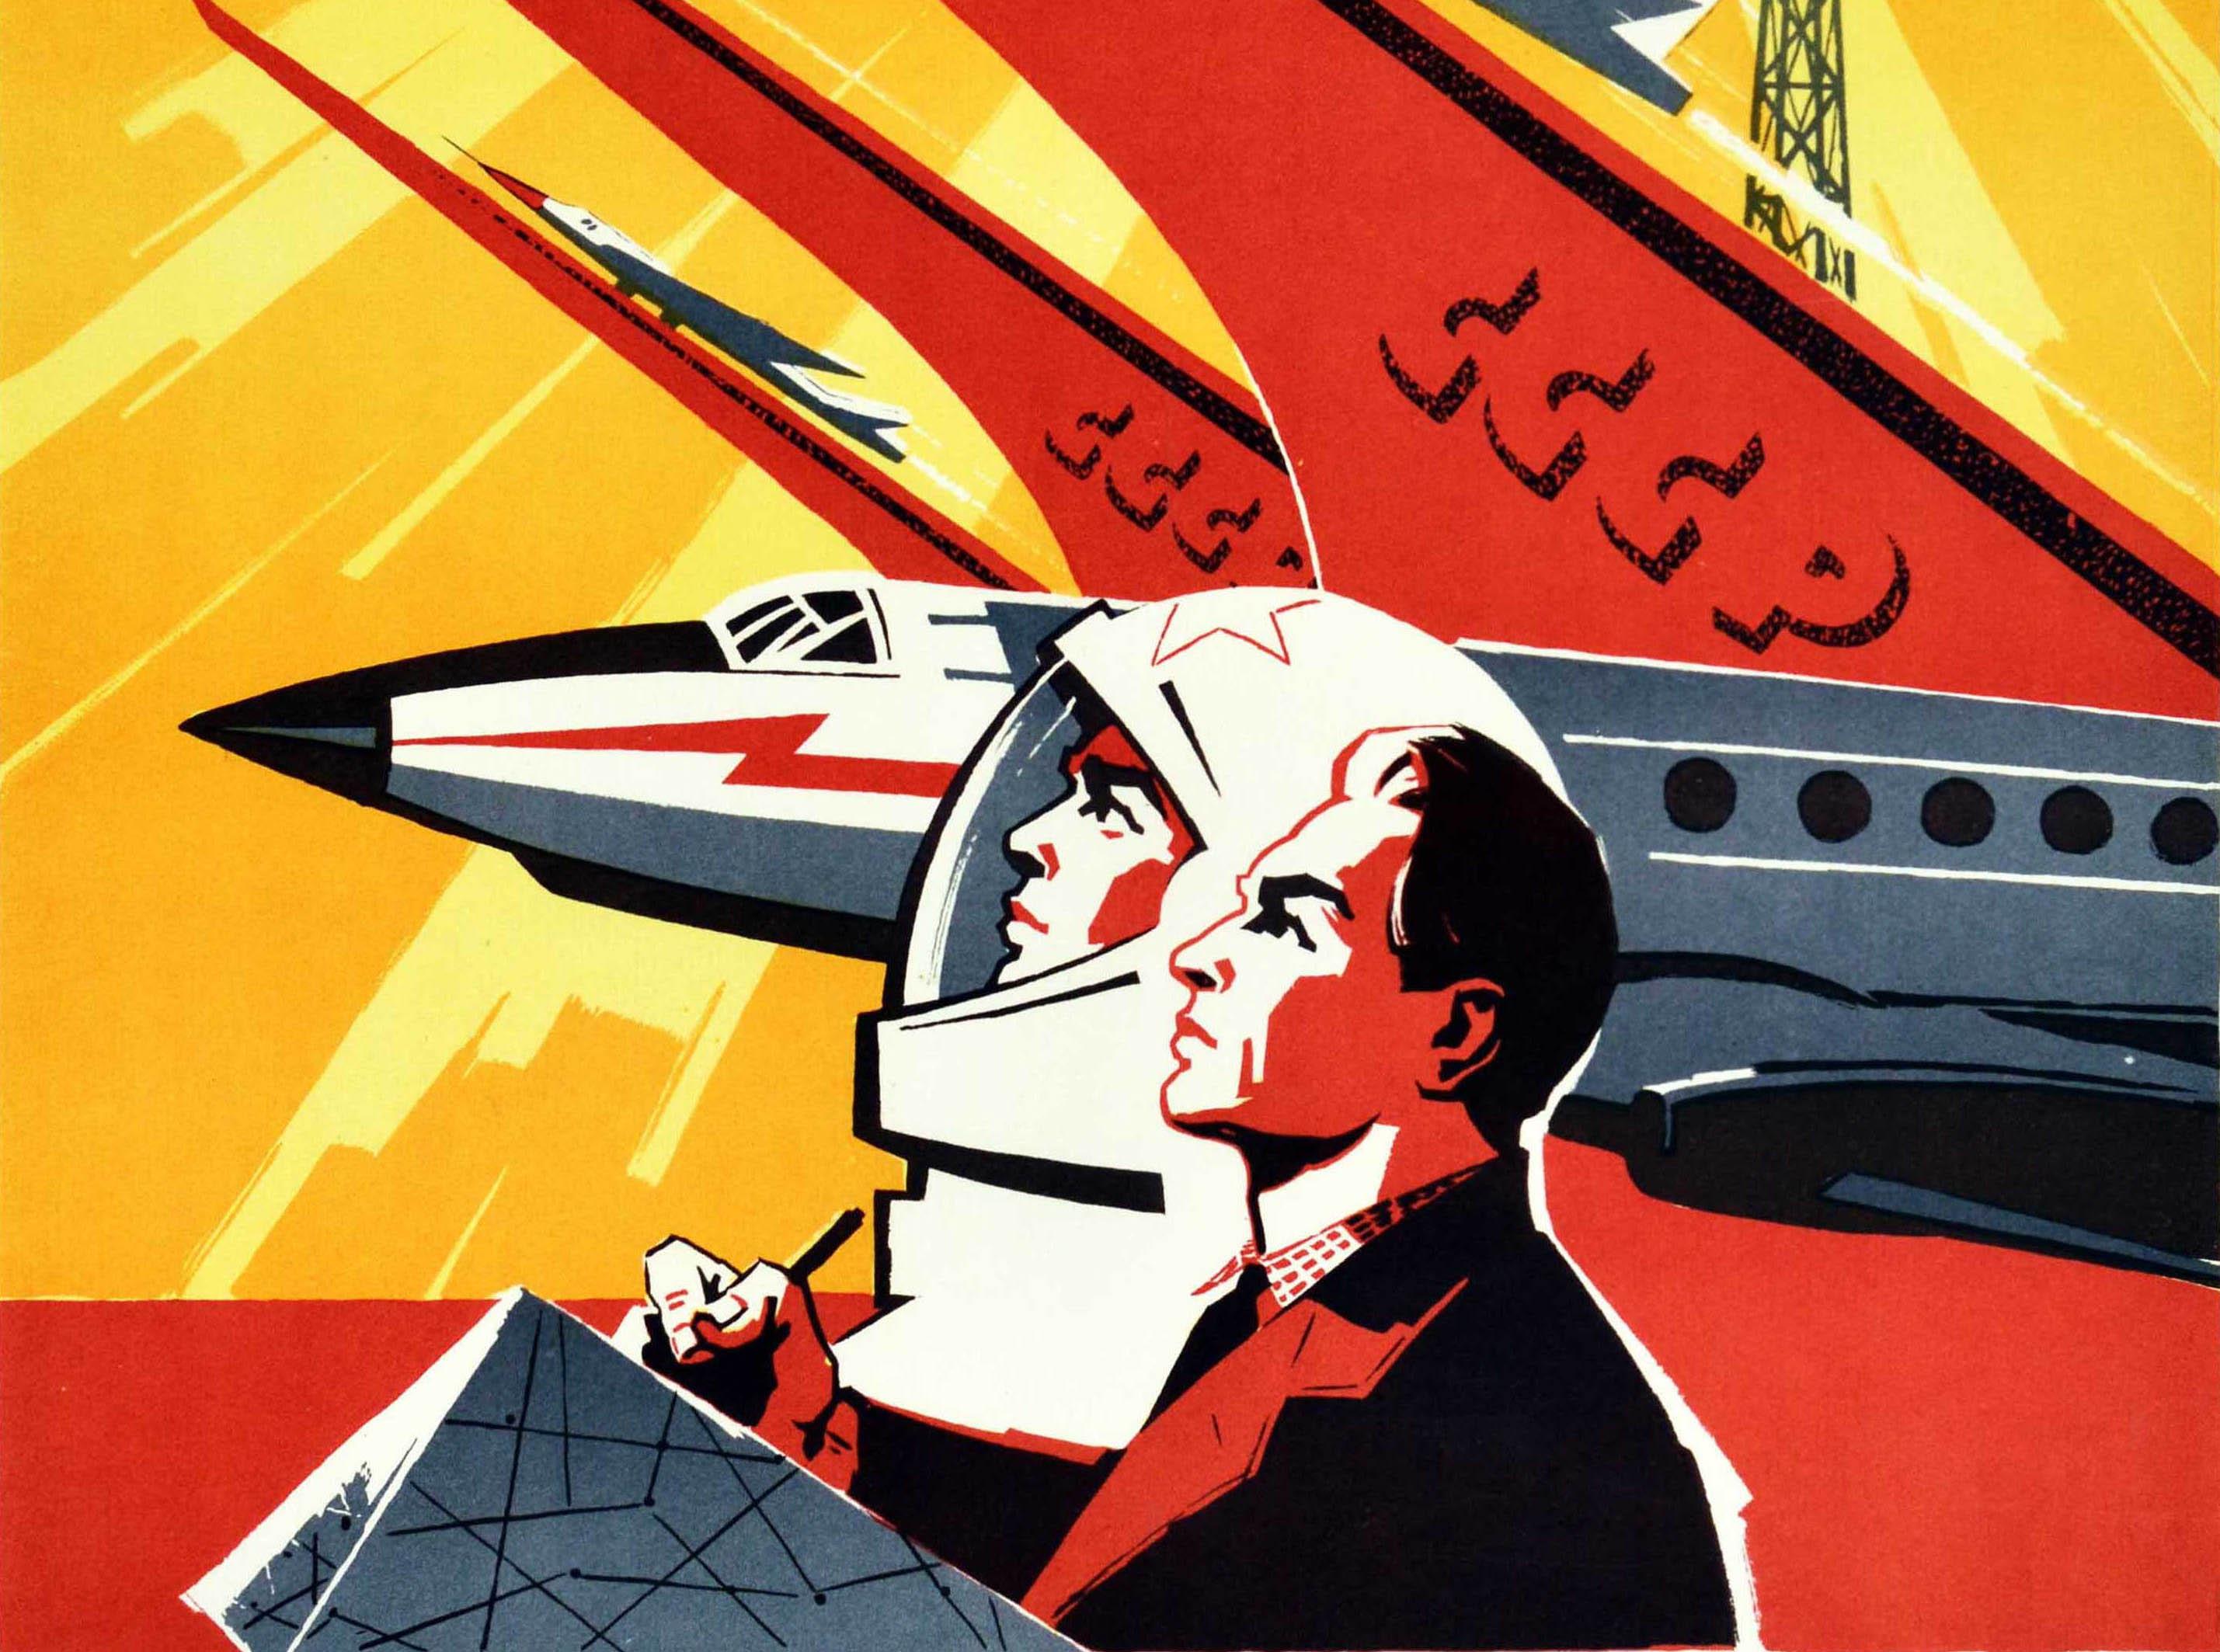 Original vintage Soviet propaganda poster celebrating scientific achievements - The air distances became close to us, we were the first to know the way into space Under the banner of the Party, our country is striving towards the expanse of